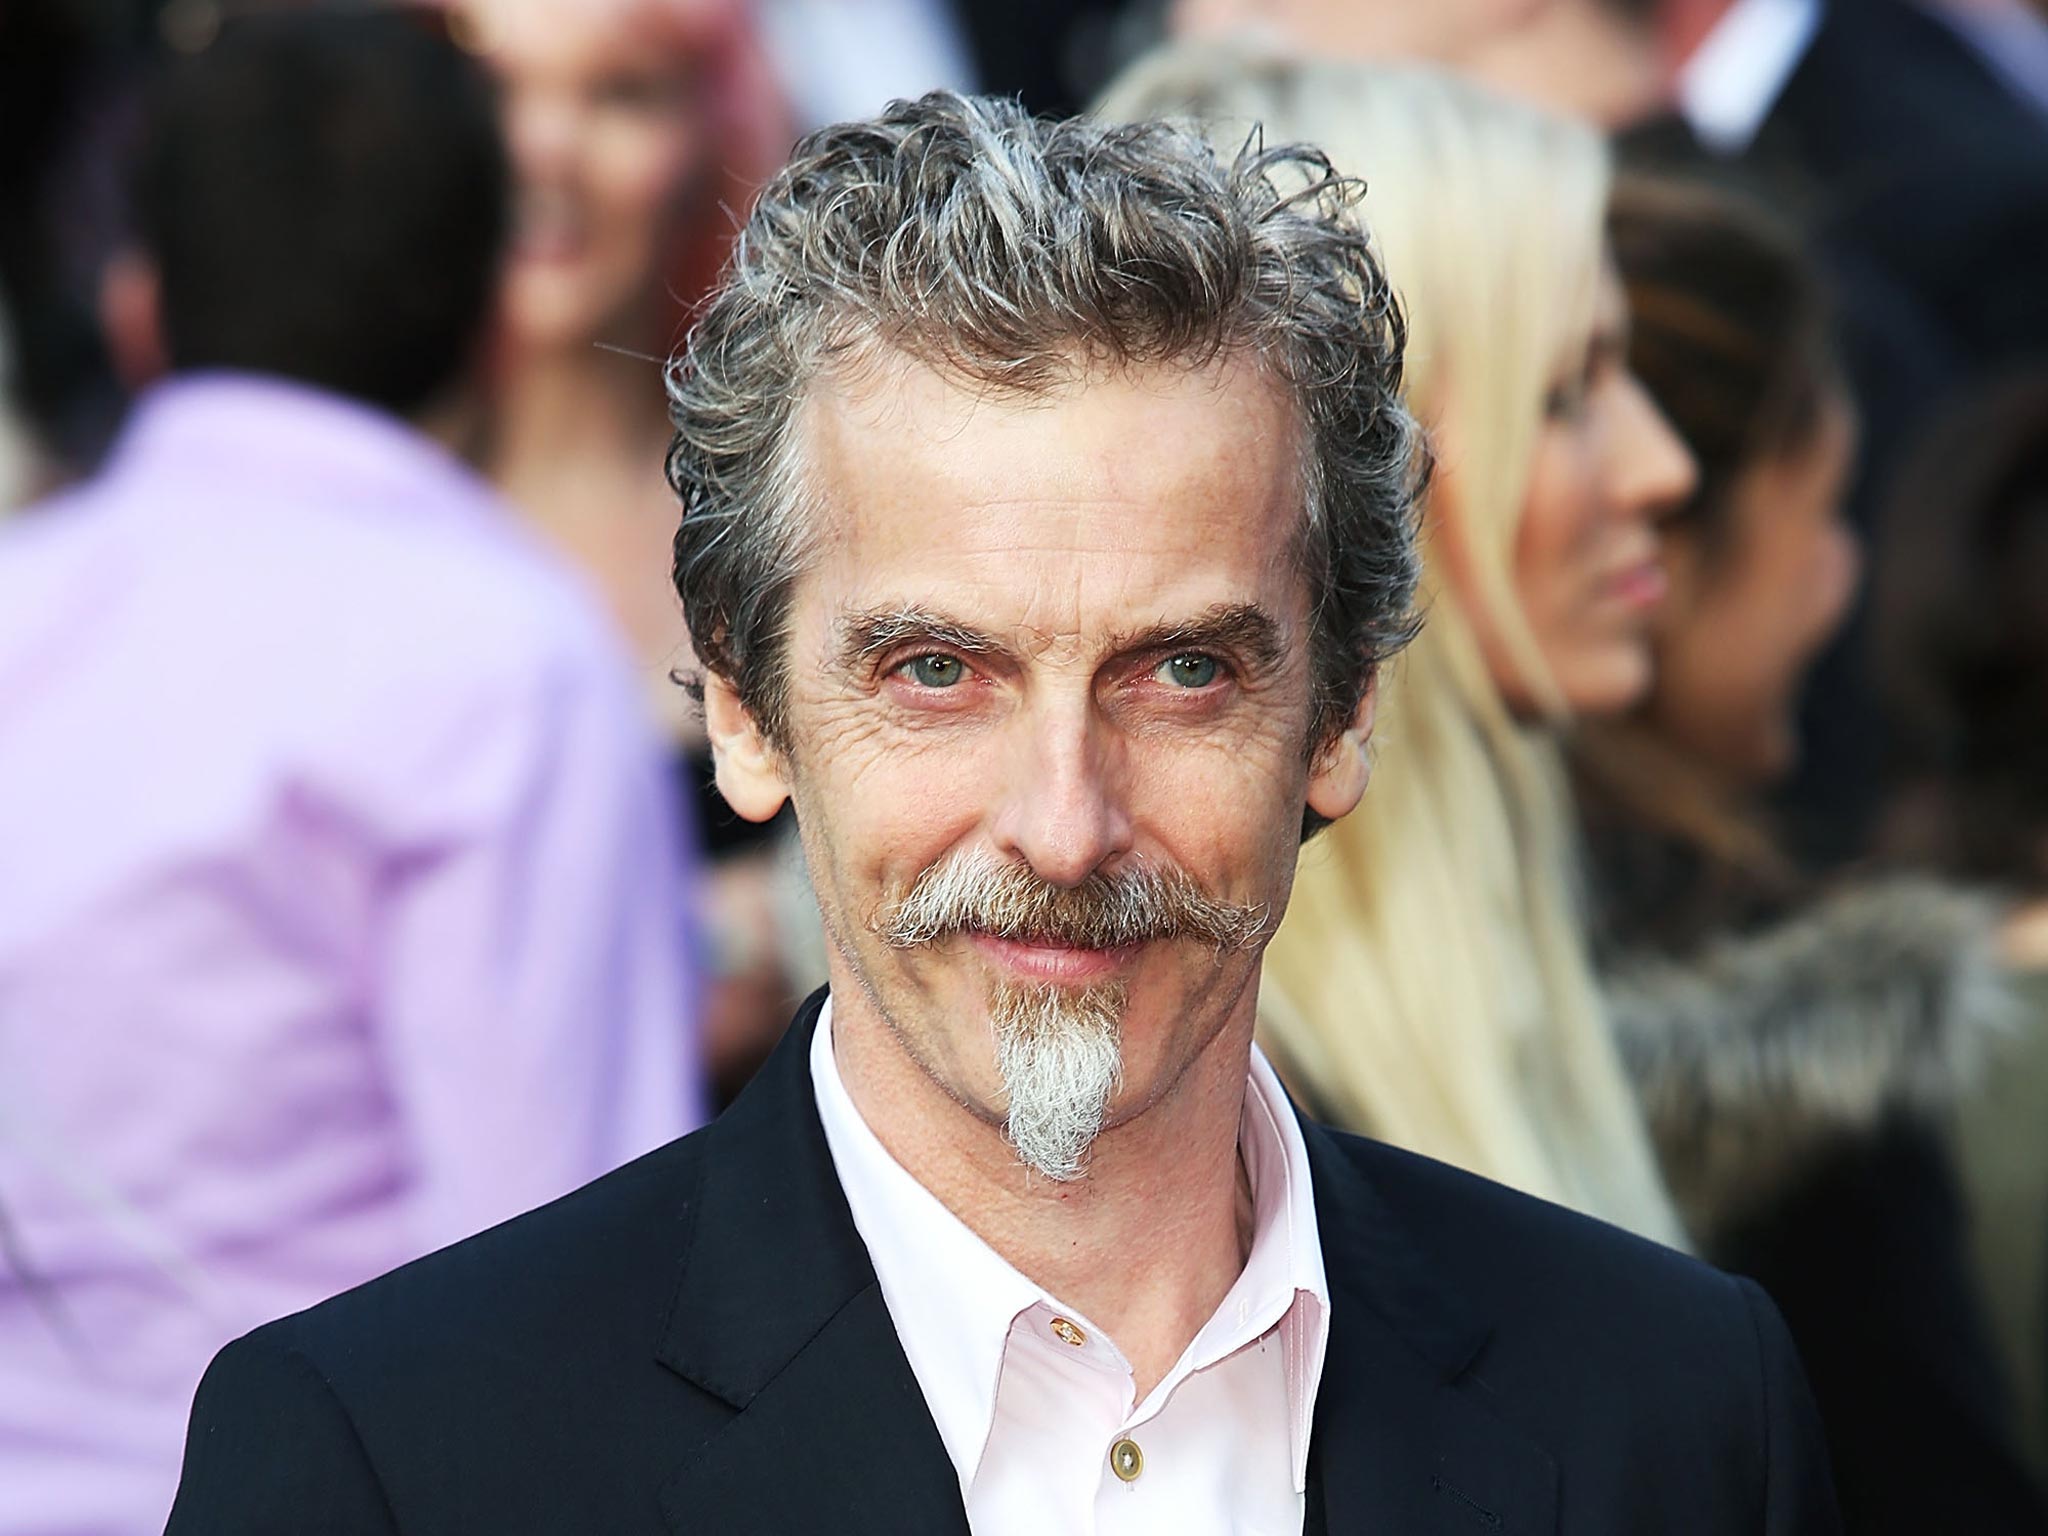 Peter Capaldi who will be playing the twelfth Doctor